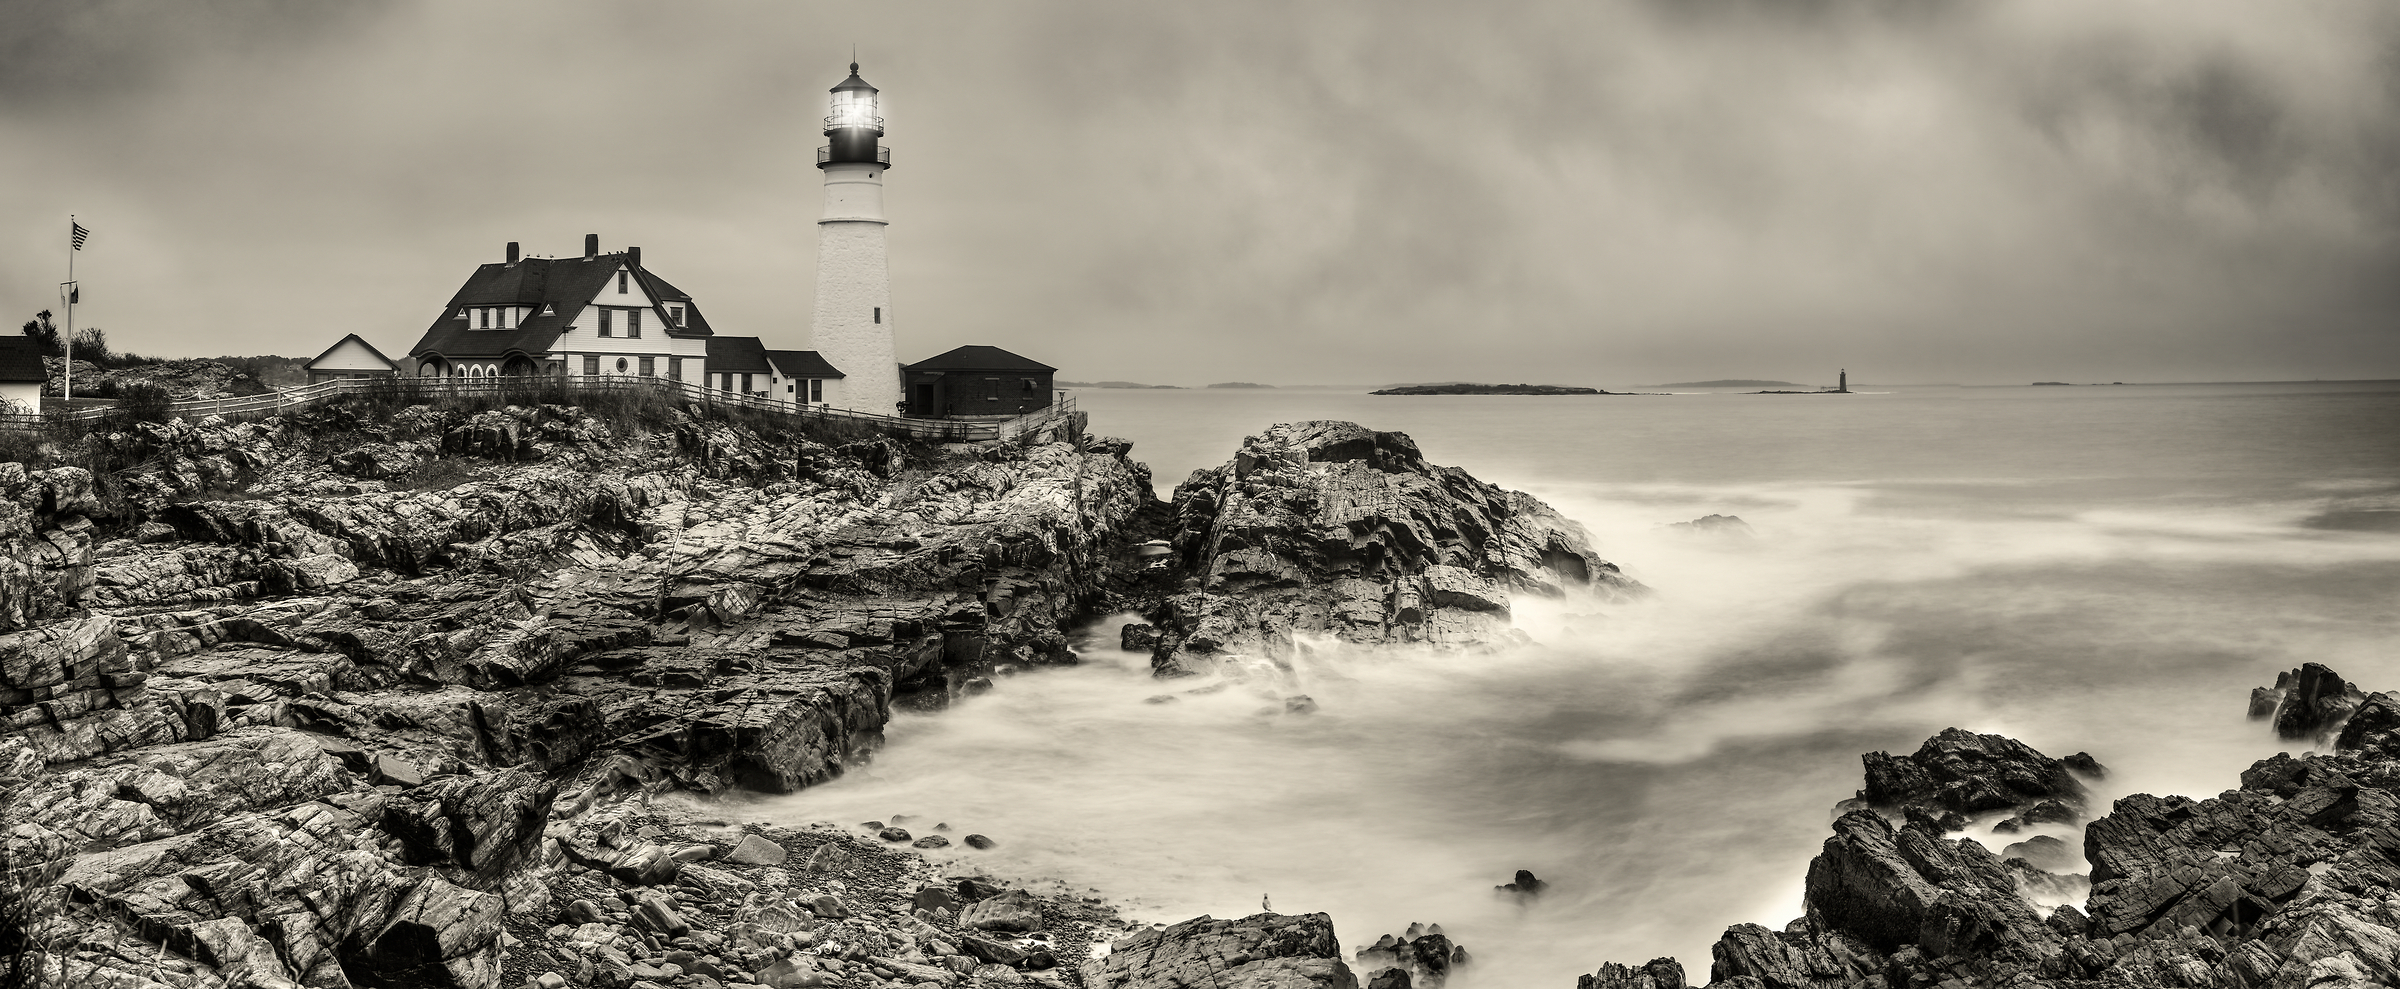 521 megapixels! An artistic photograph of a lighthouse with the ocean and rocks; photograph created by Phil Crawshay in Portland Head Lighthouse, Portland, Maine